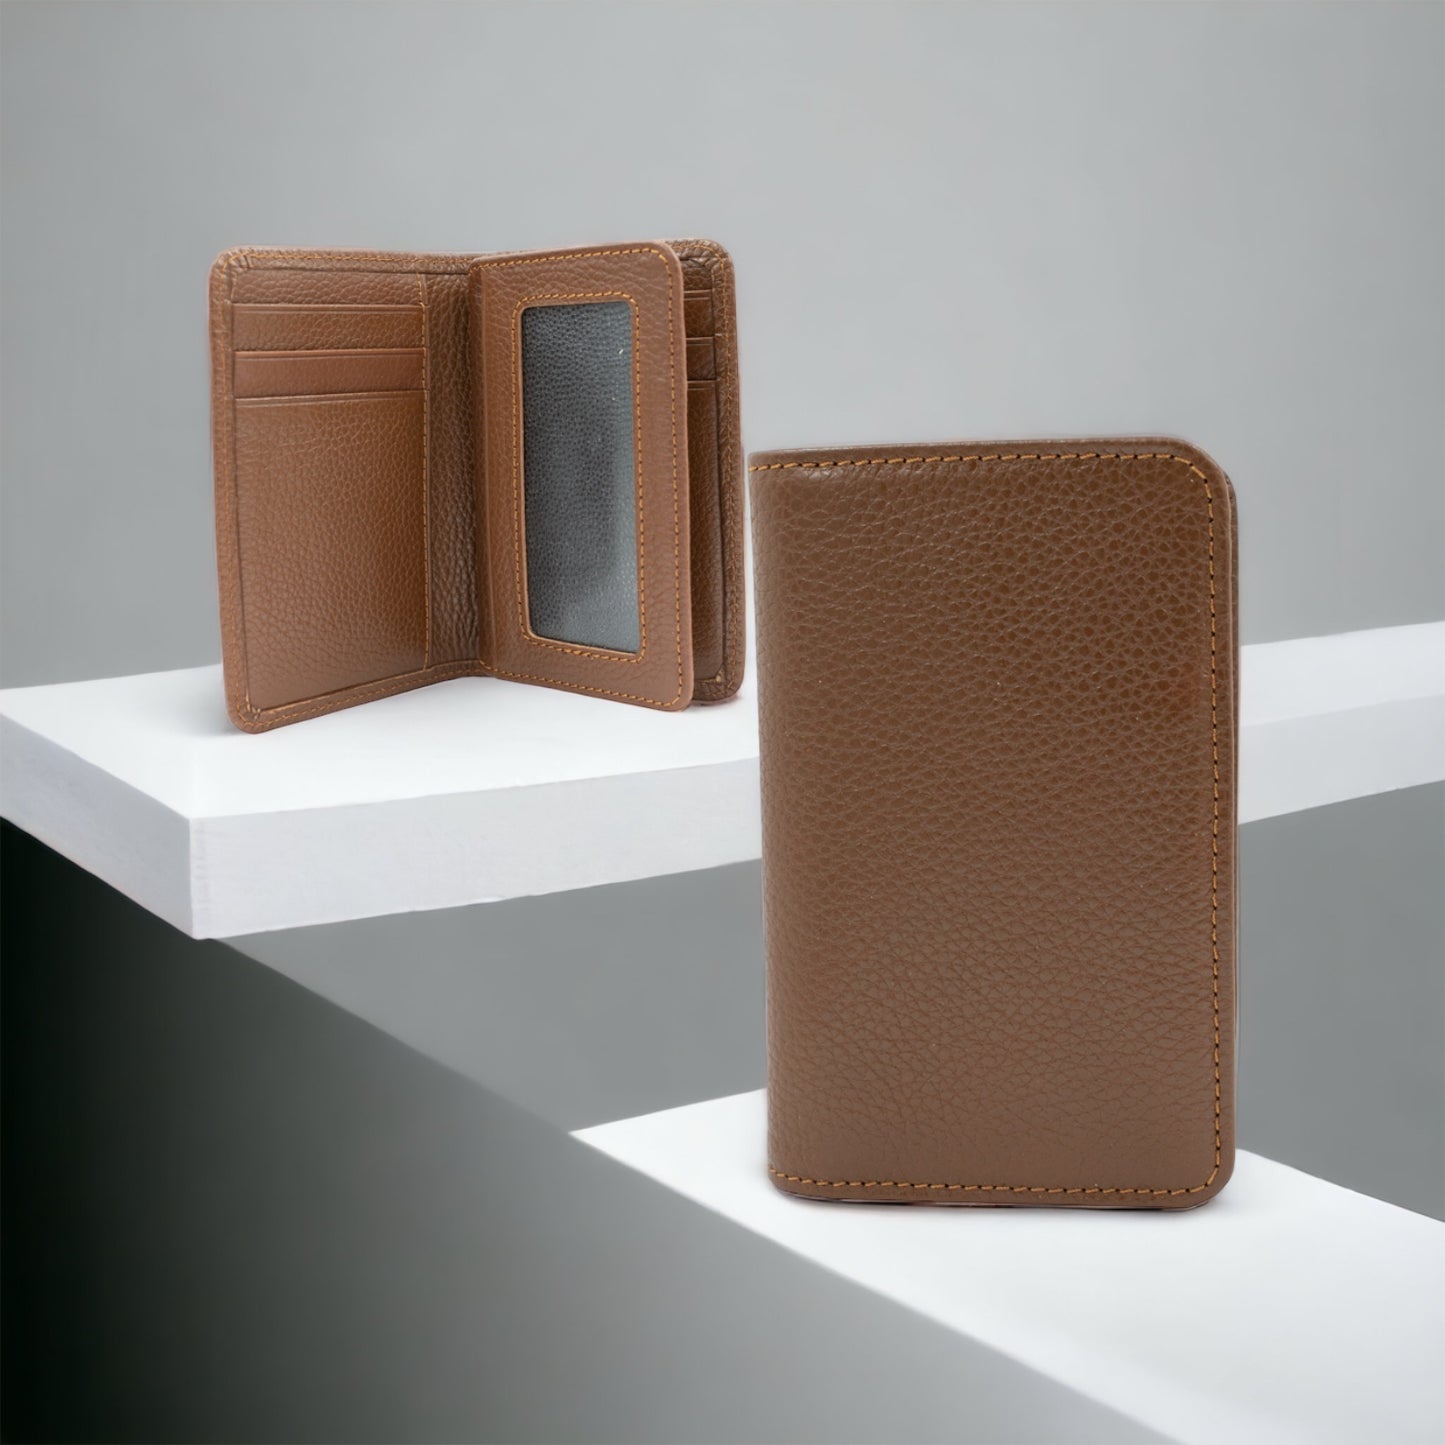 Brown Leather Cardholder 3304T